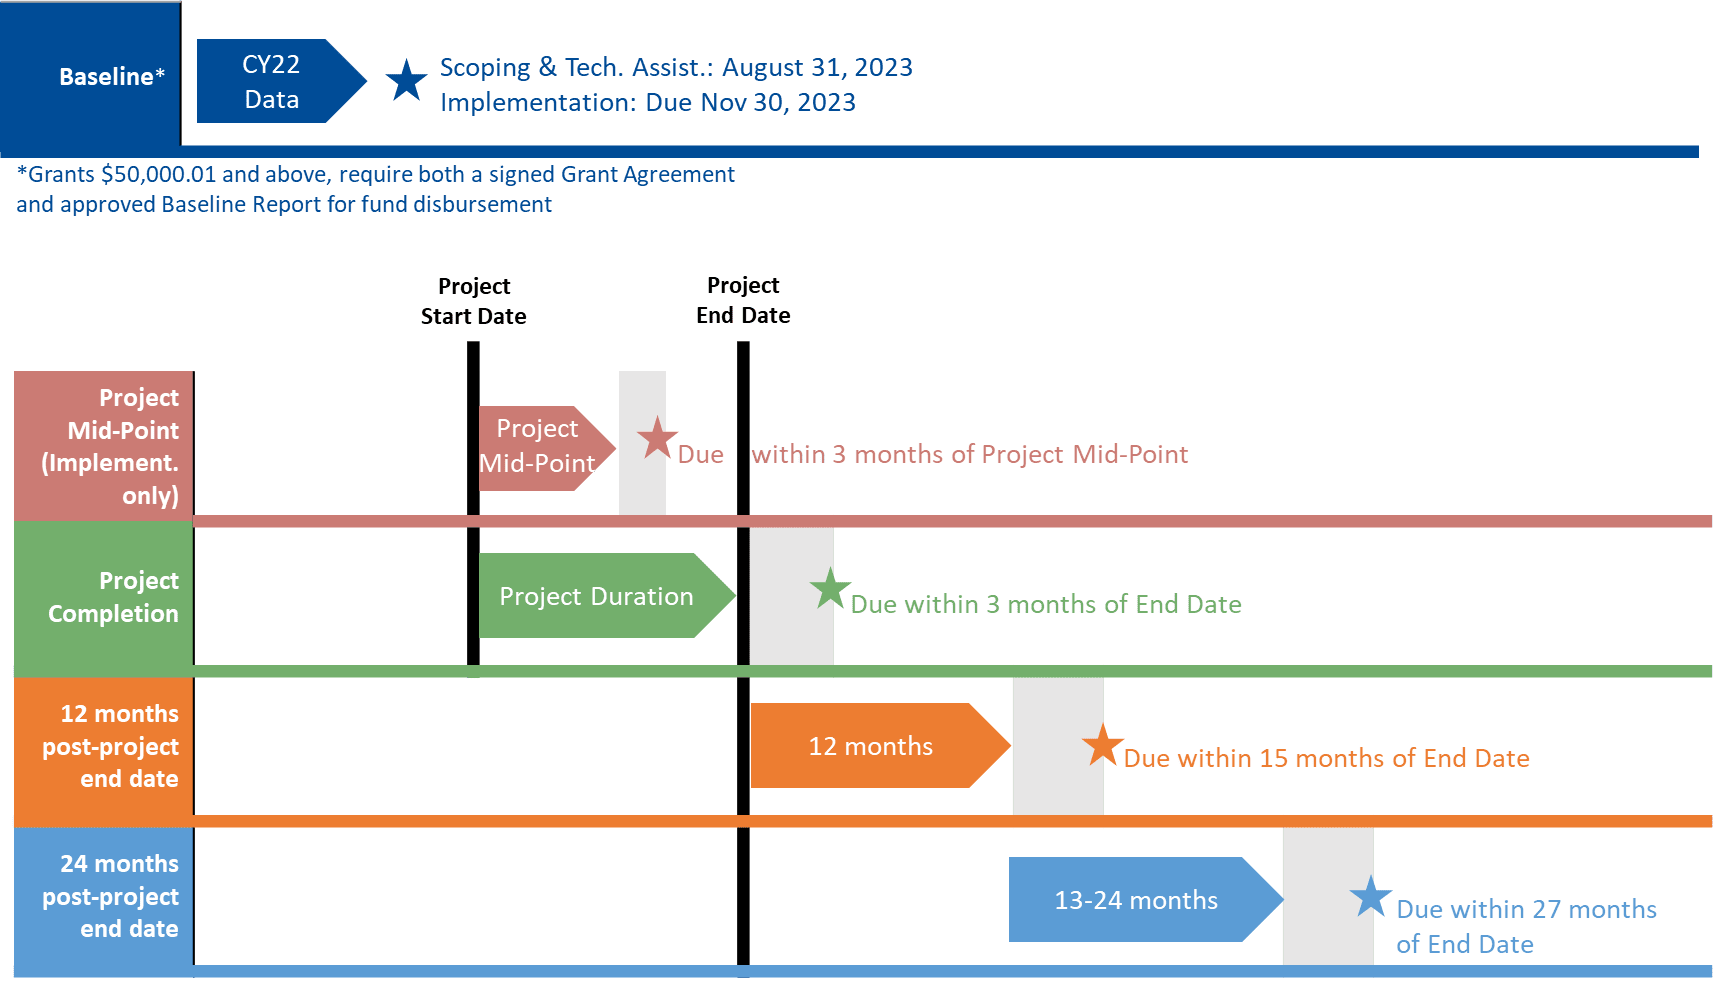 This graphic shows the timeline associated with the 2023 Scoping and Tech Assist Grantee Requirements